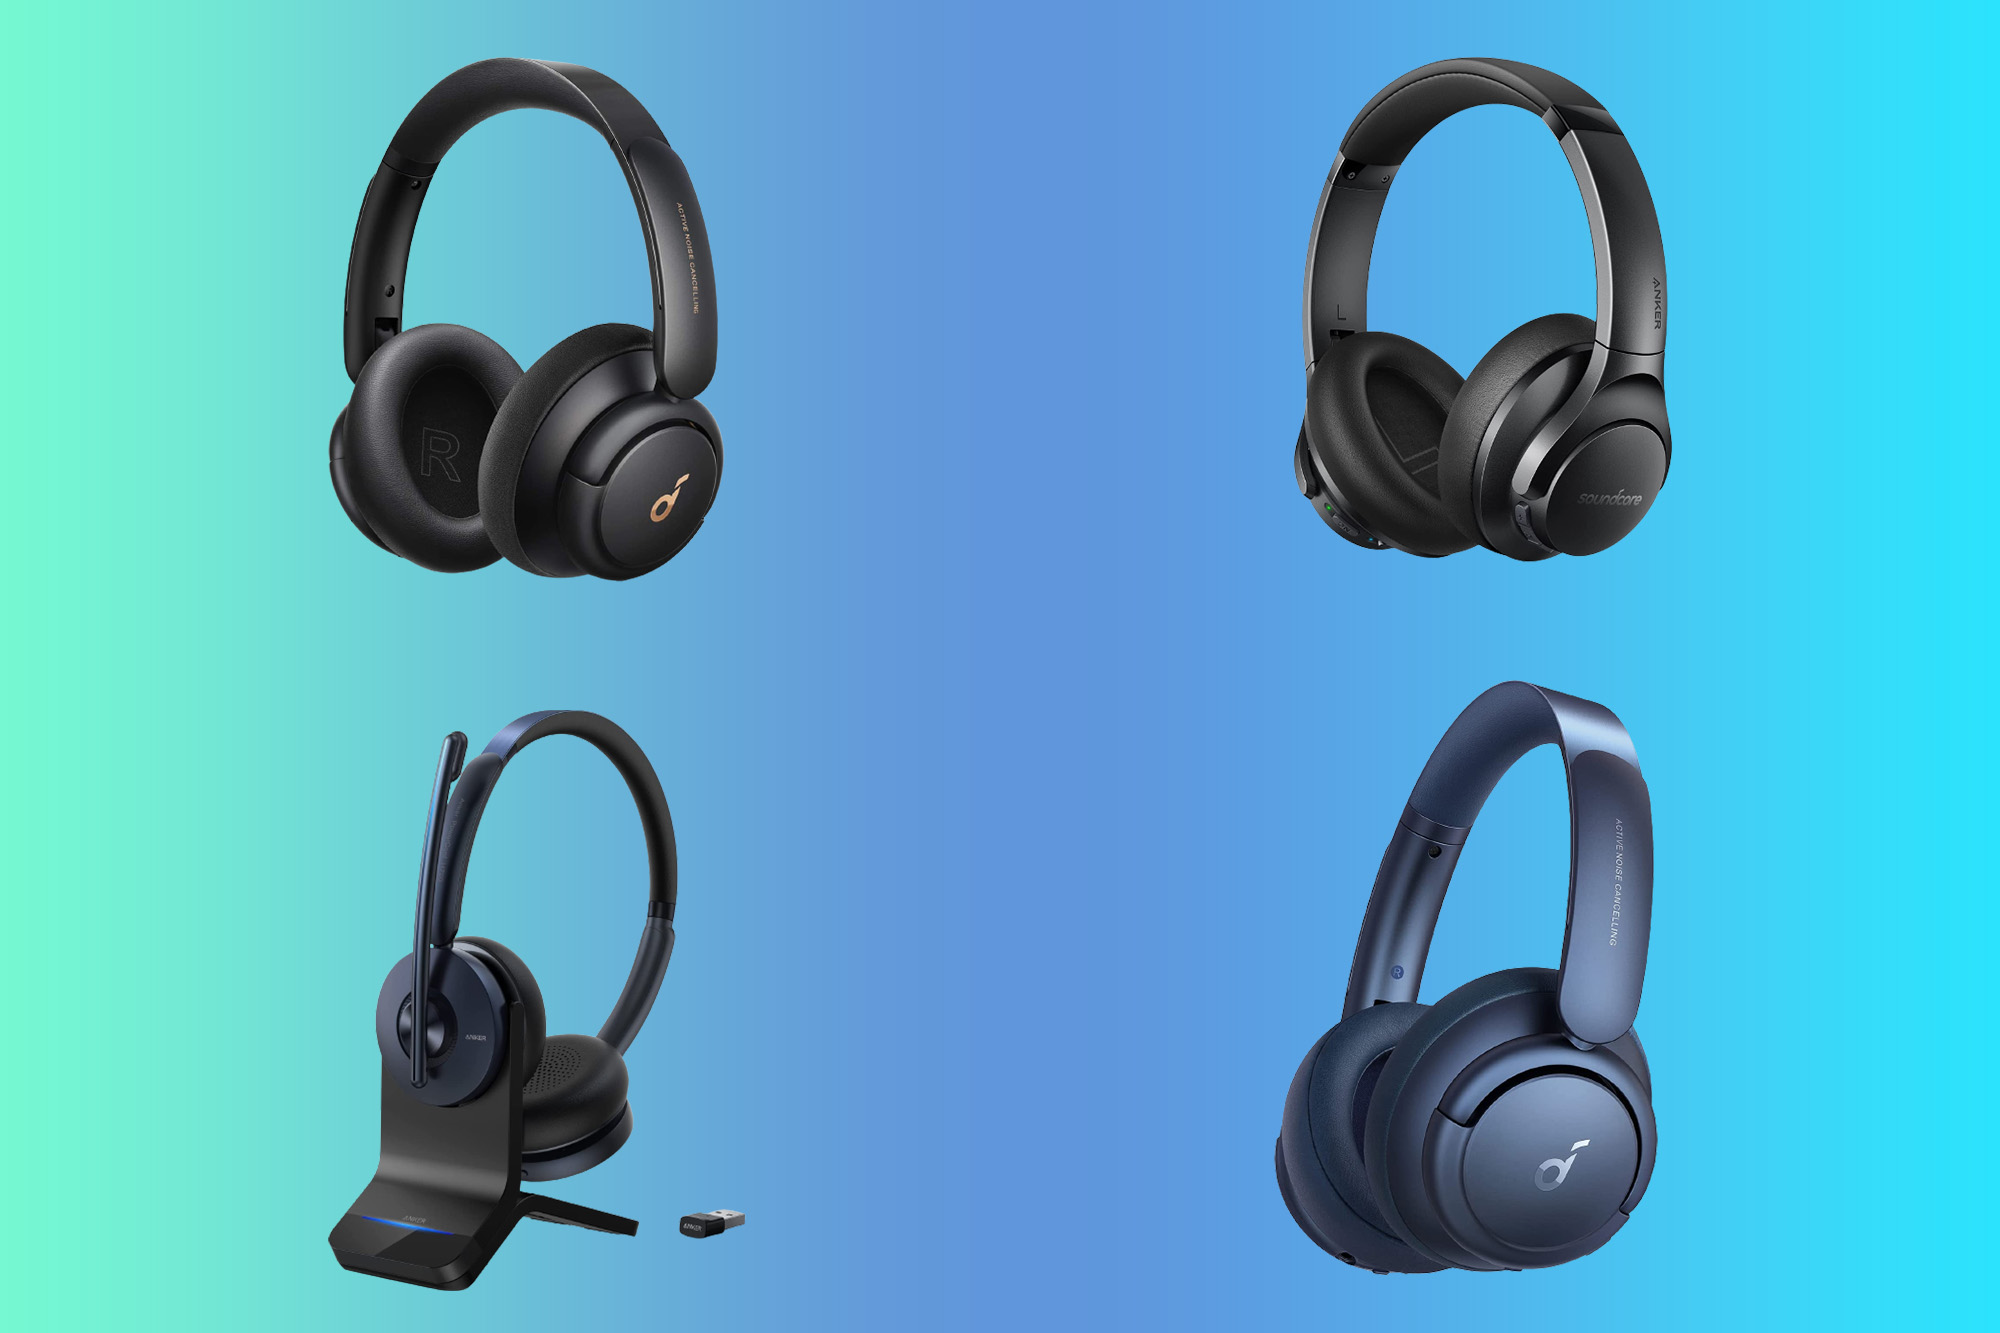 Anker wireless headphones on a blue and green gradient background